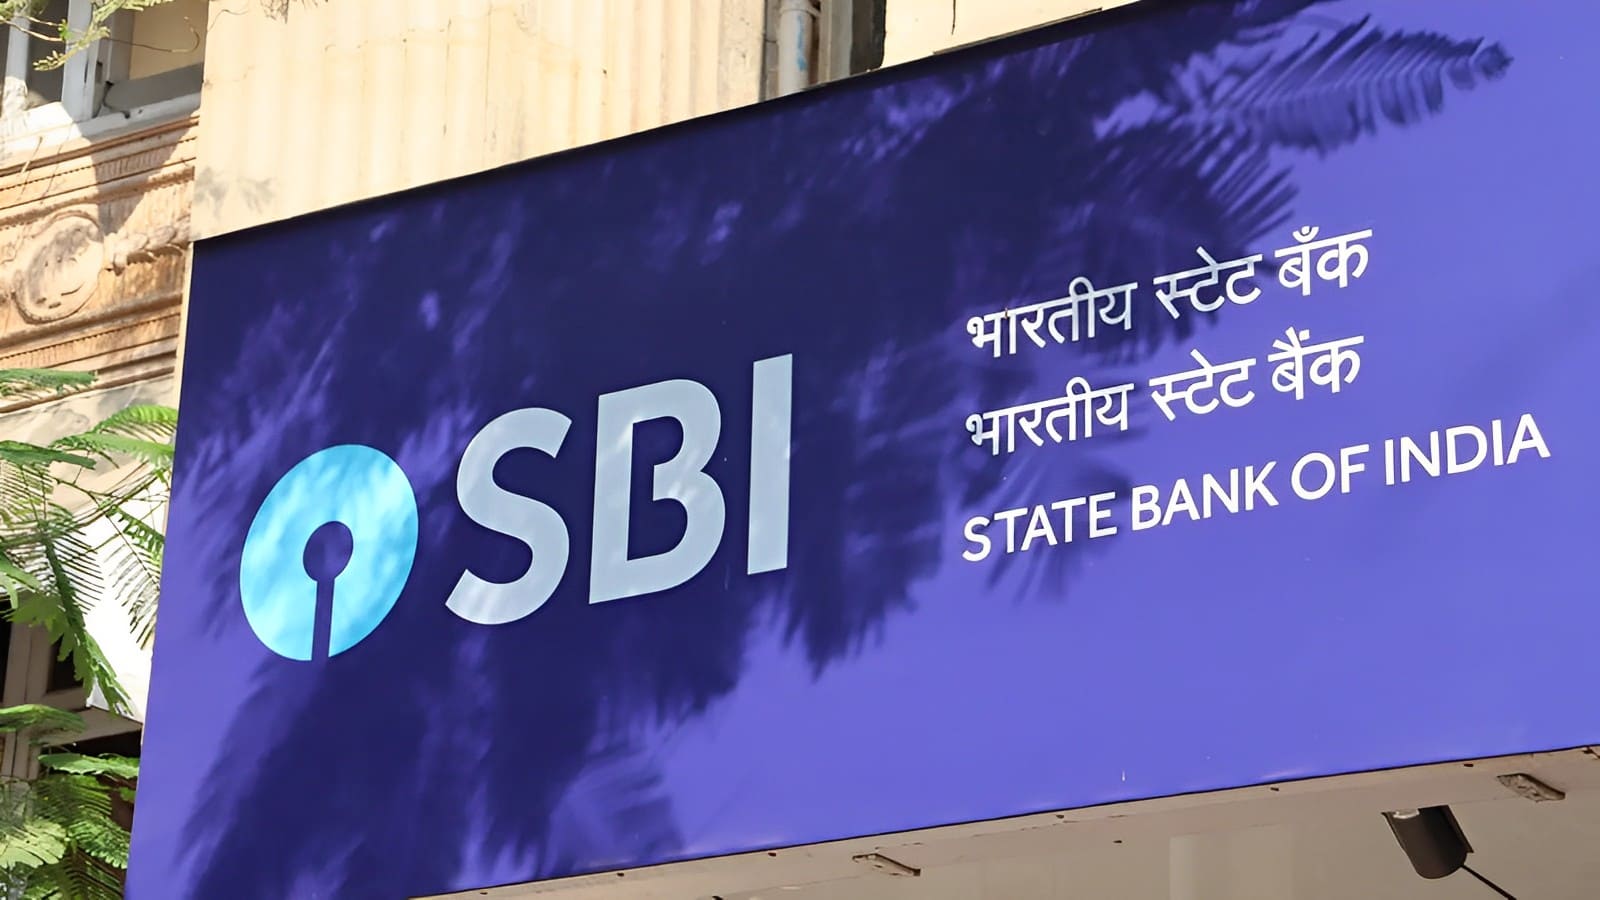 SBI to increase base and prime lending rates tomorrow